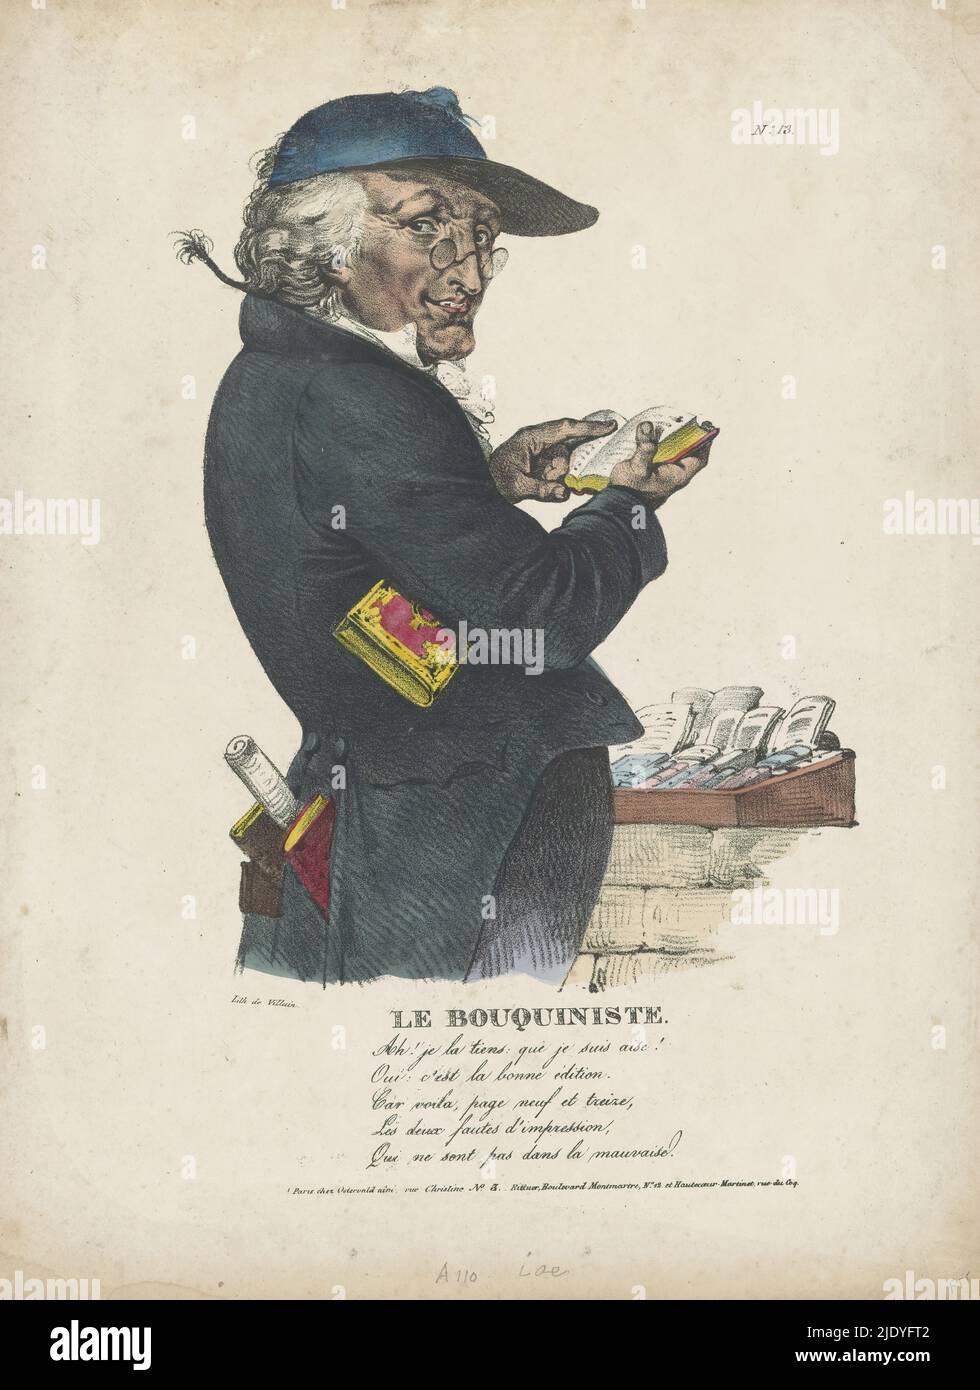 Man examining a book in front of a book stall, Le bouquiniste (title on object), Under his arm he clasps a book and his coat pockets are also full of books. Numbered in the upper right: No. 13., print maker: anonymous, printer: François Jean Villain, (mentioned on object), publisher: Jean Fréderic Ostervald, (mentioned on object), Paris, c. 1834 - 1852, paper, height 354 mm × width 272 mm Stock Photo